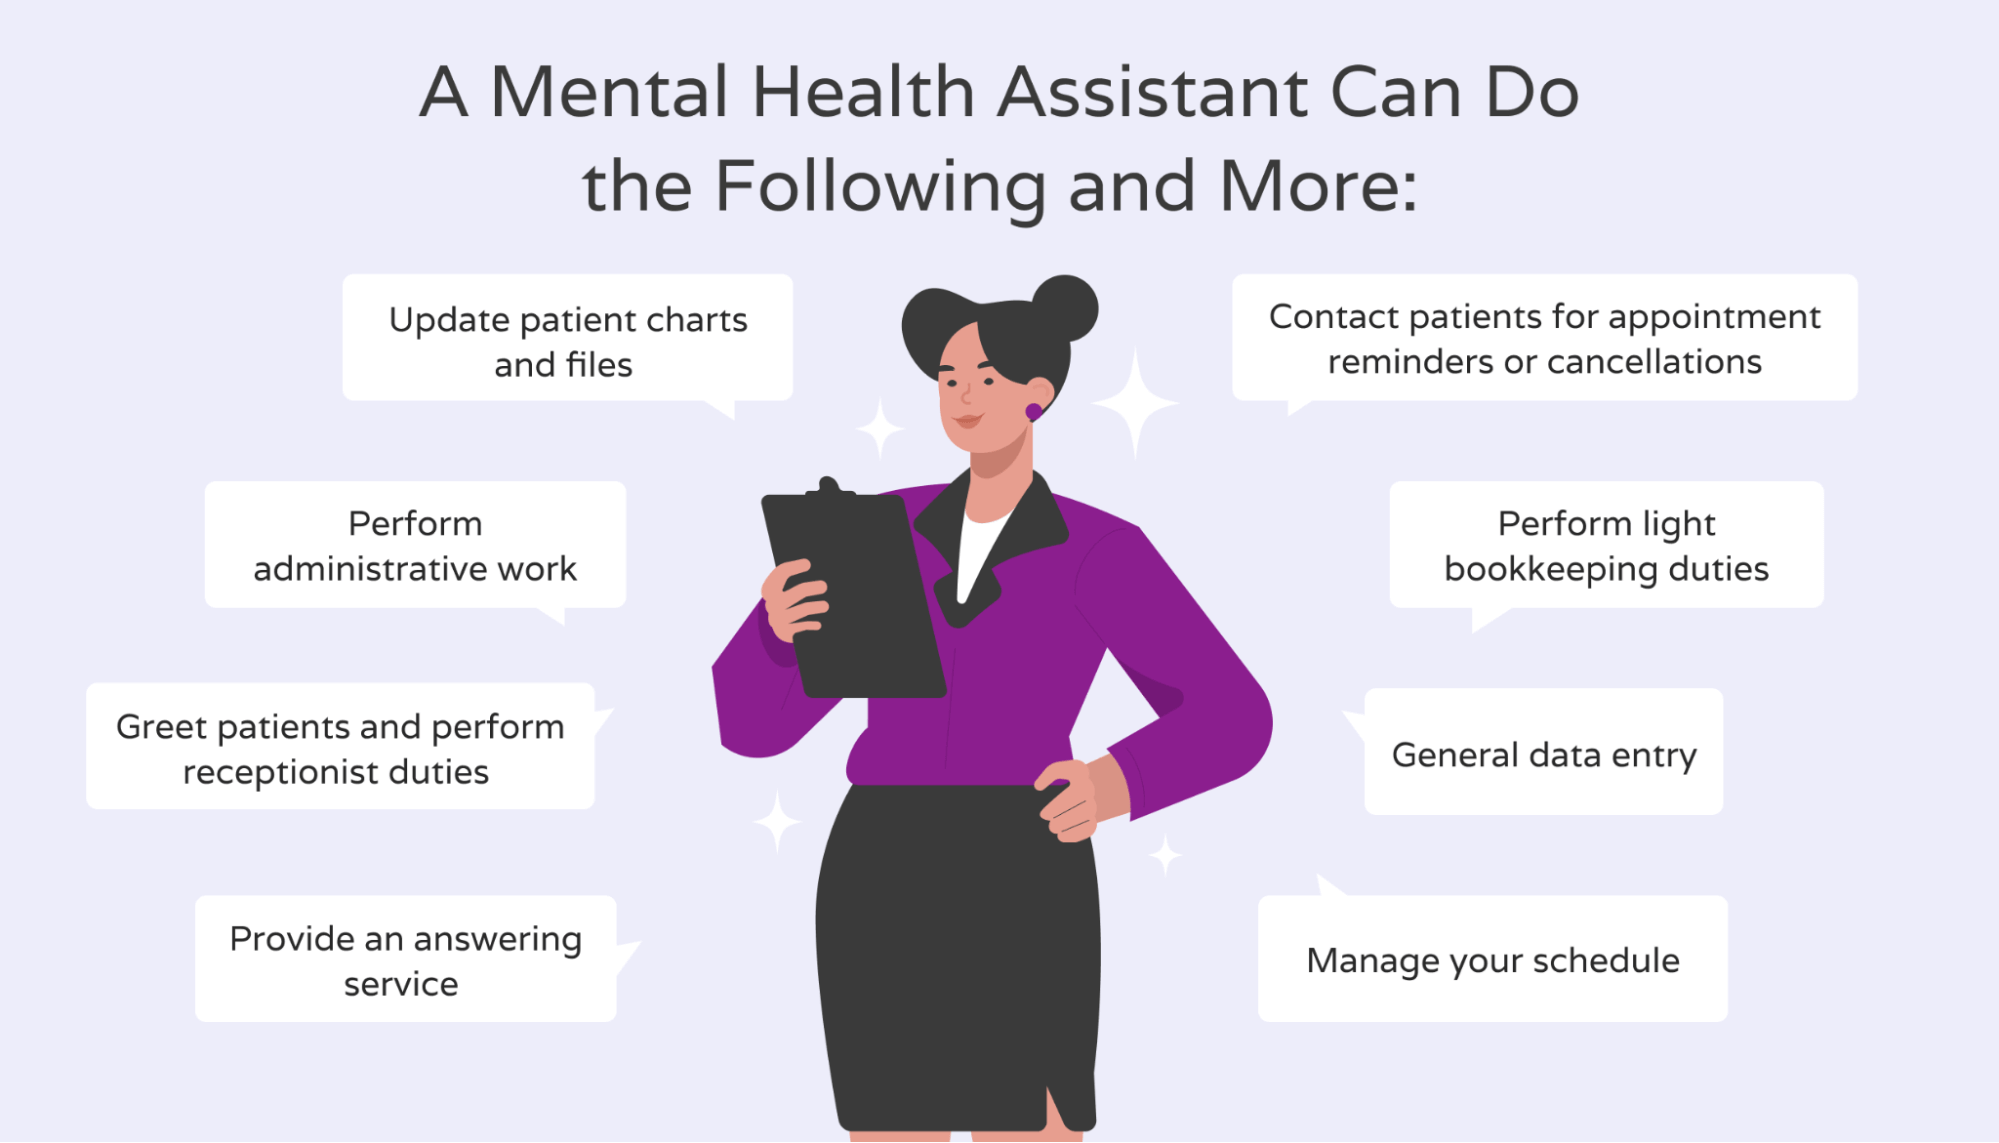 What do mental health assistants do